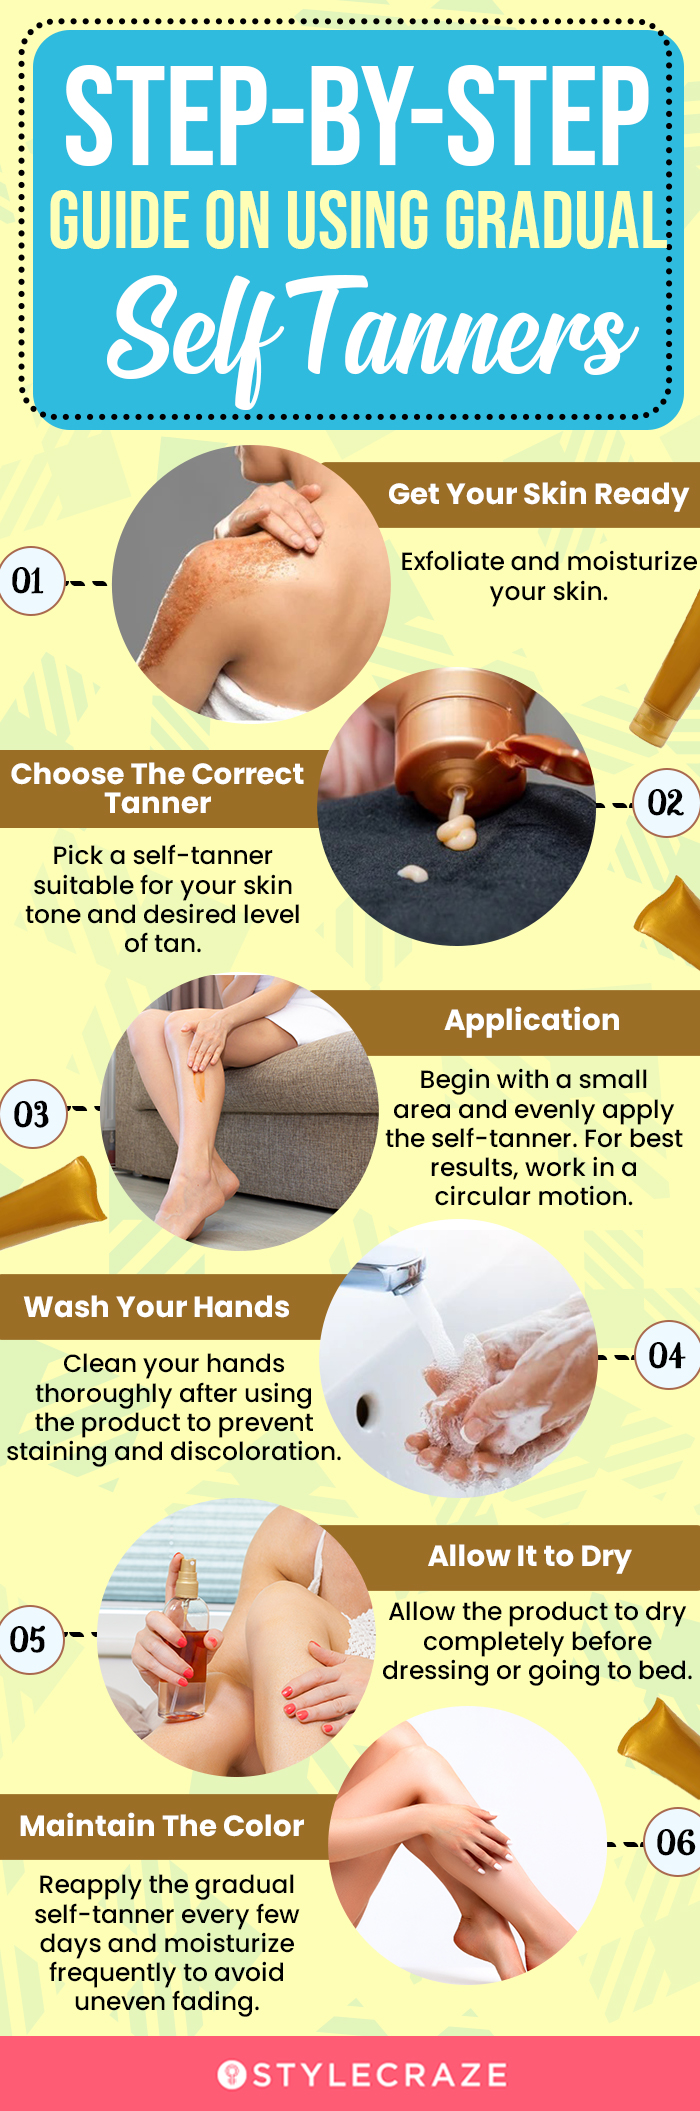 Step-By-Step Guide On Using Gradual Self Tanners (infographic)